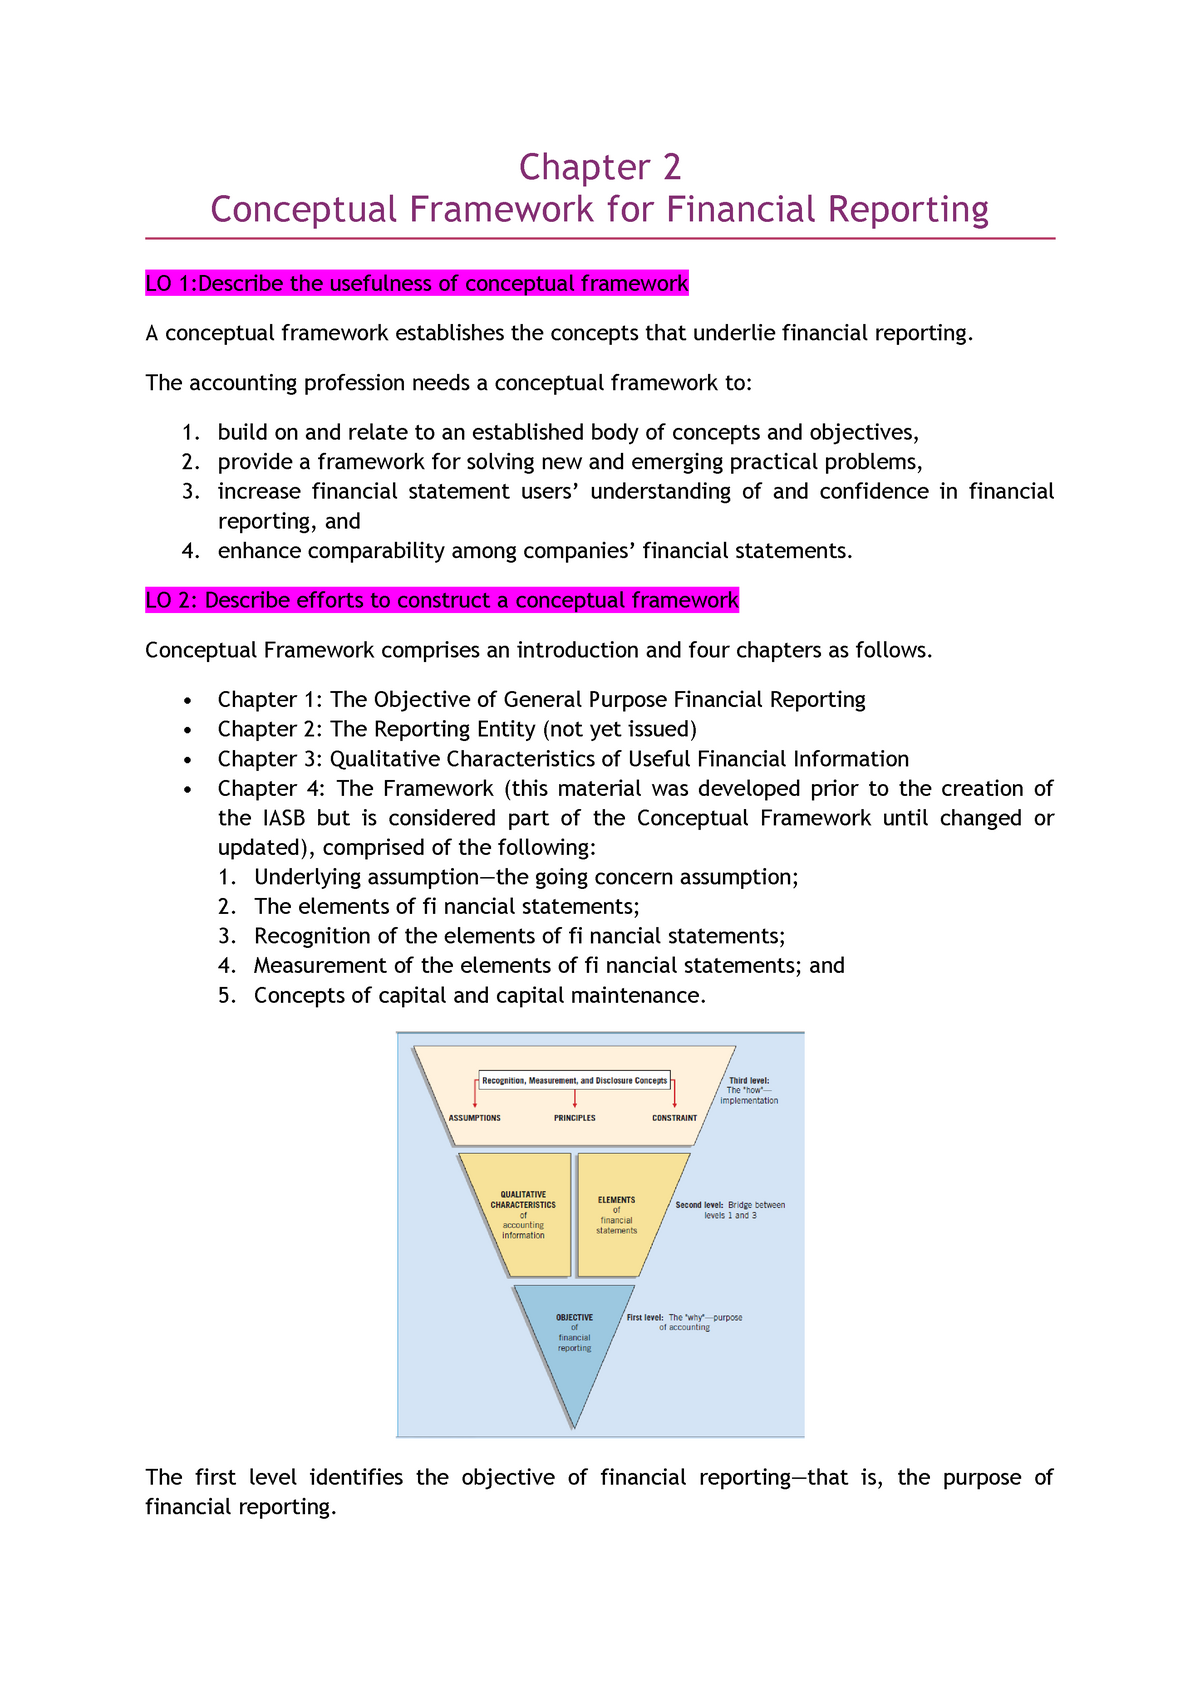 Ch 2 Conceptual Framework For Financial Reporting The Accounting Profession Needs A Conceptual 1580